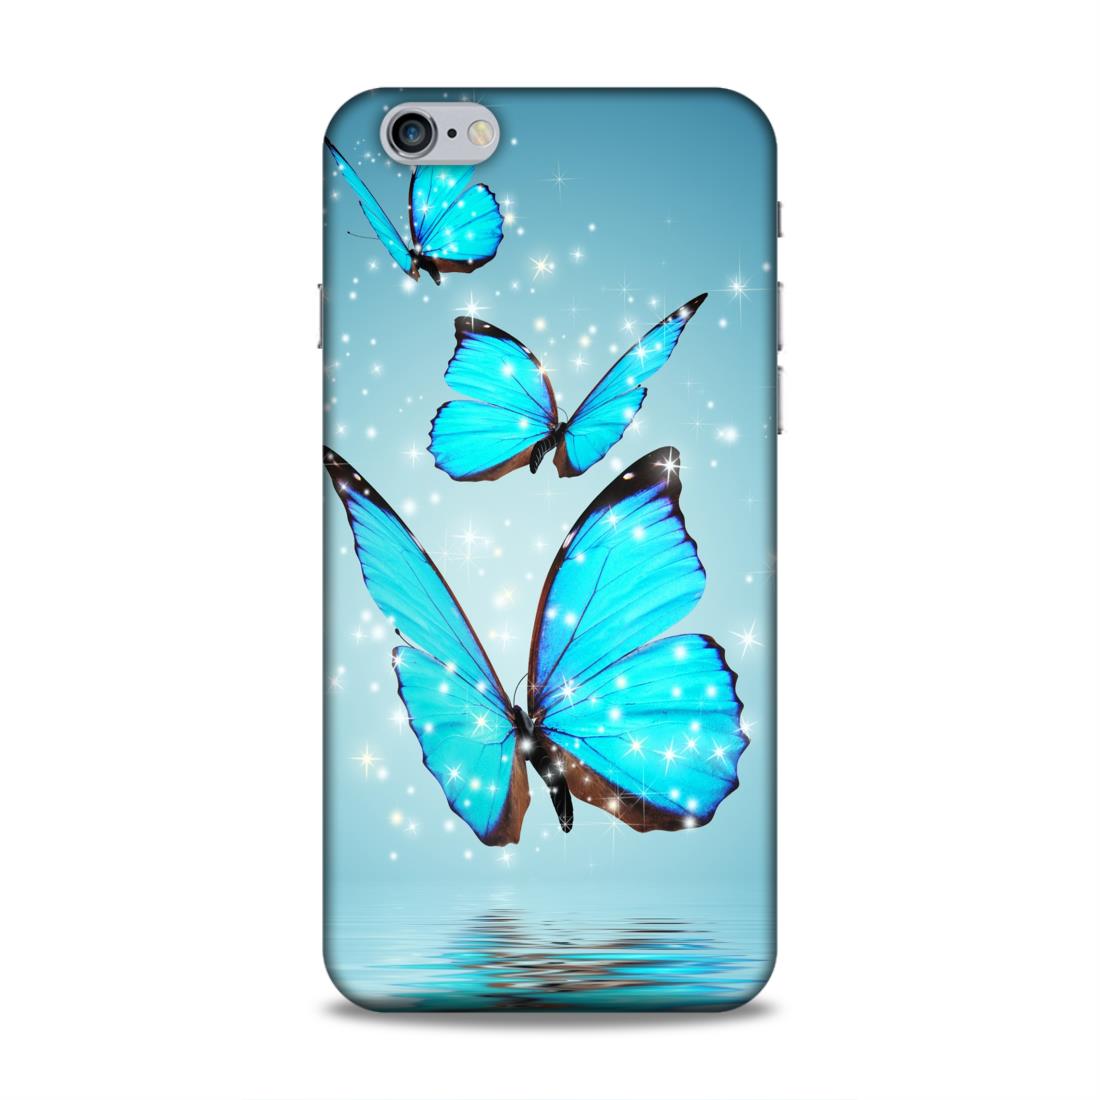 Blue Butterfly Hard Back Case For Apple iPhone 6 Plus / 6s Plus